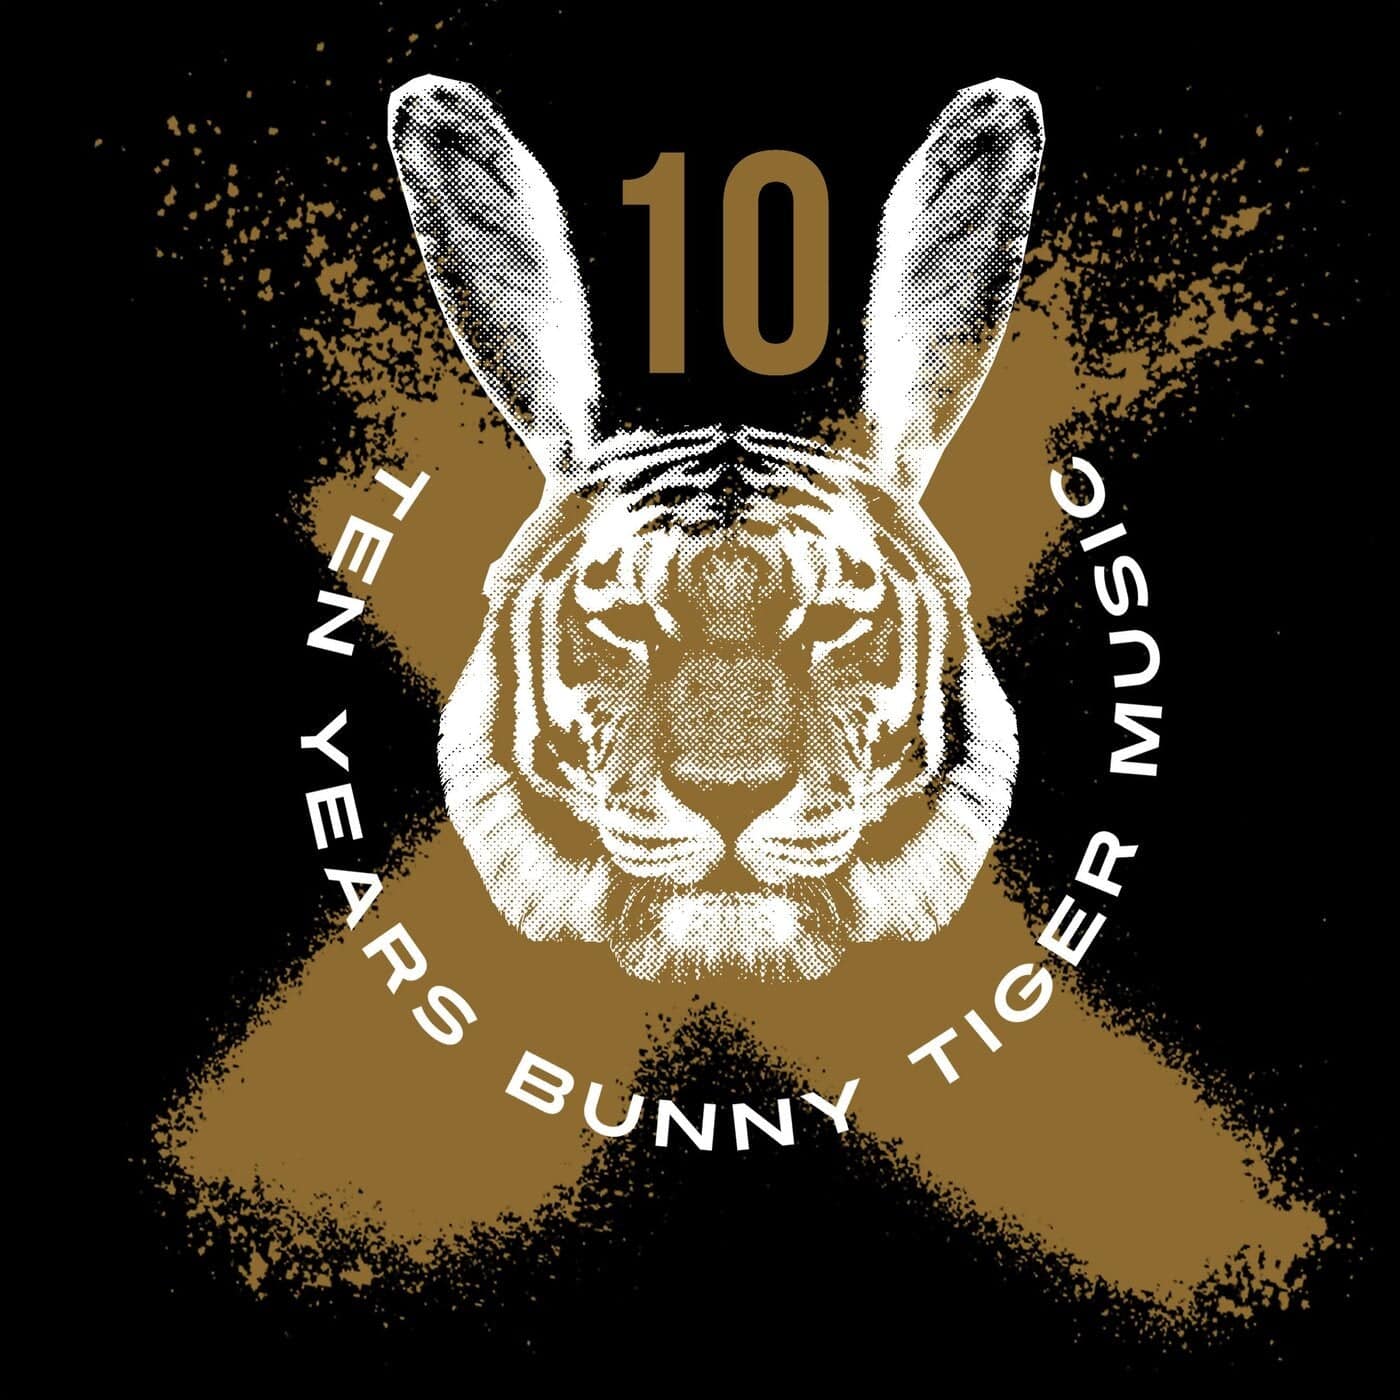 Download VA - Bunny Tiger 10 Years Anniversary on Electrobuzz